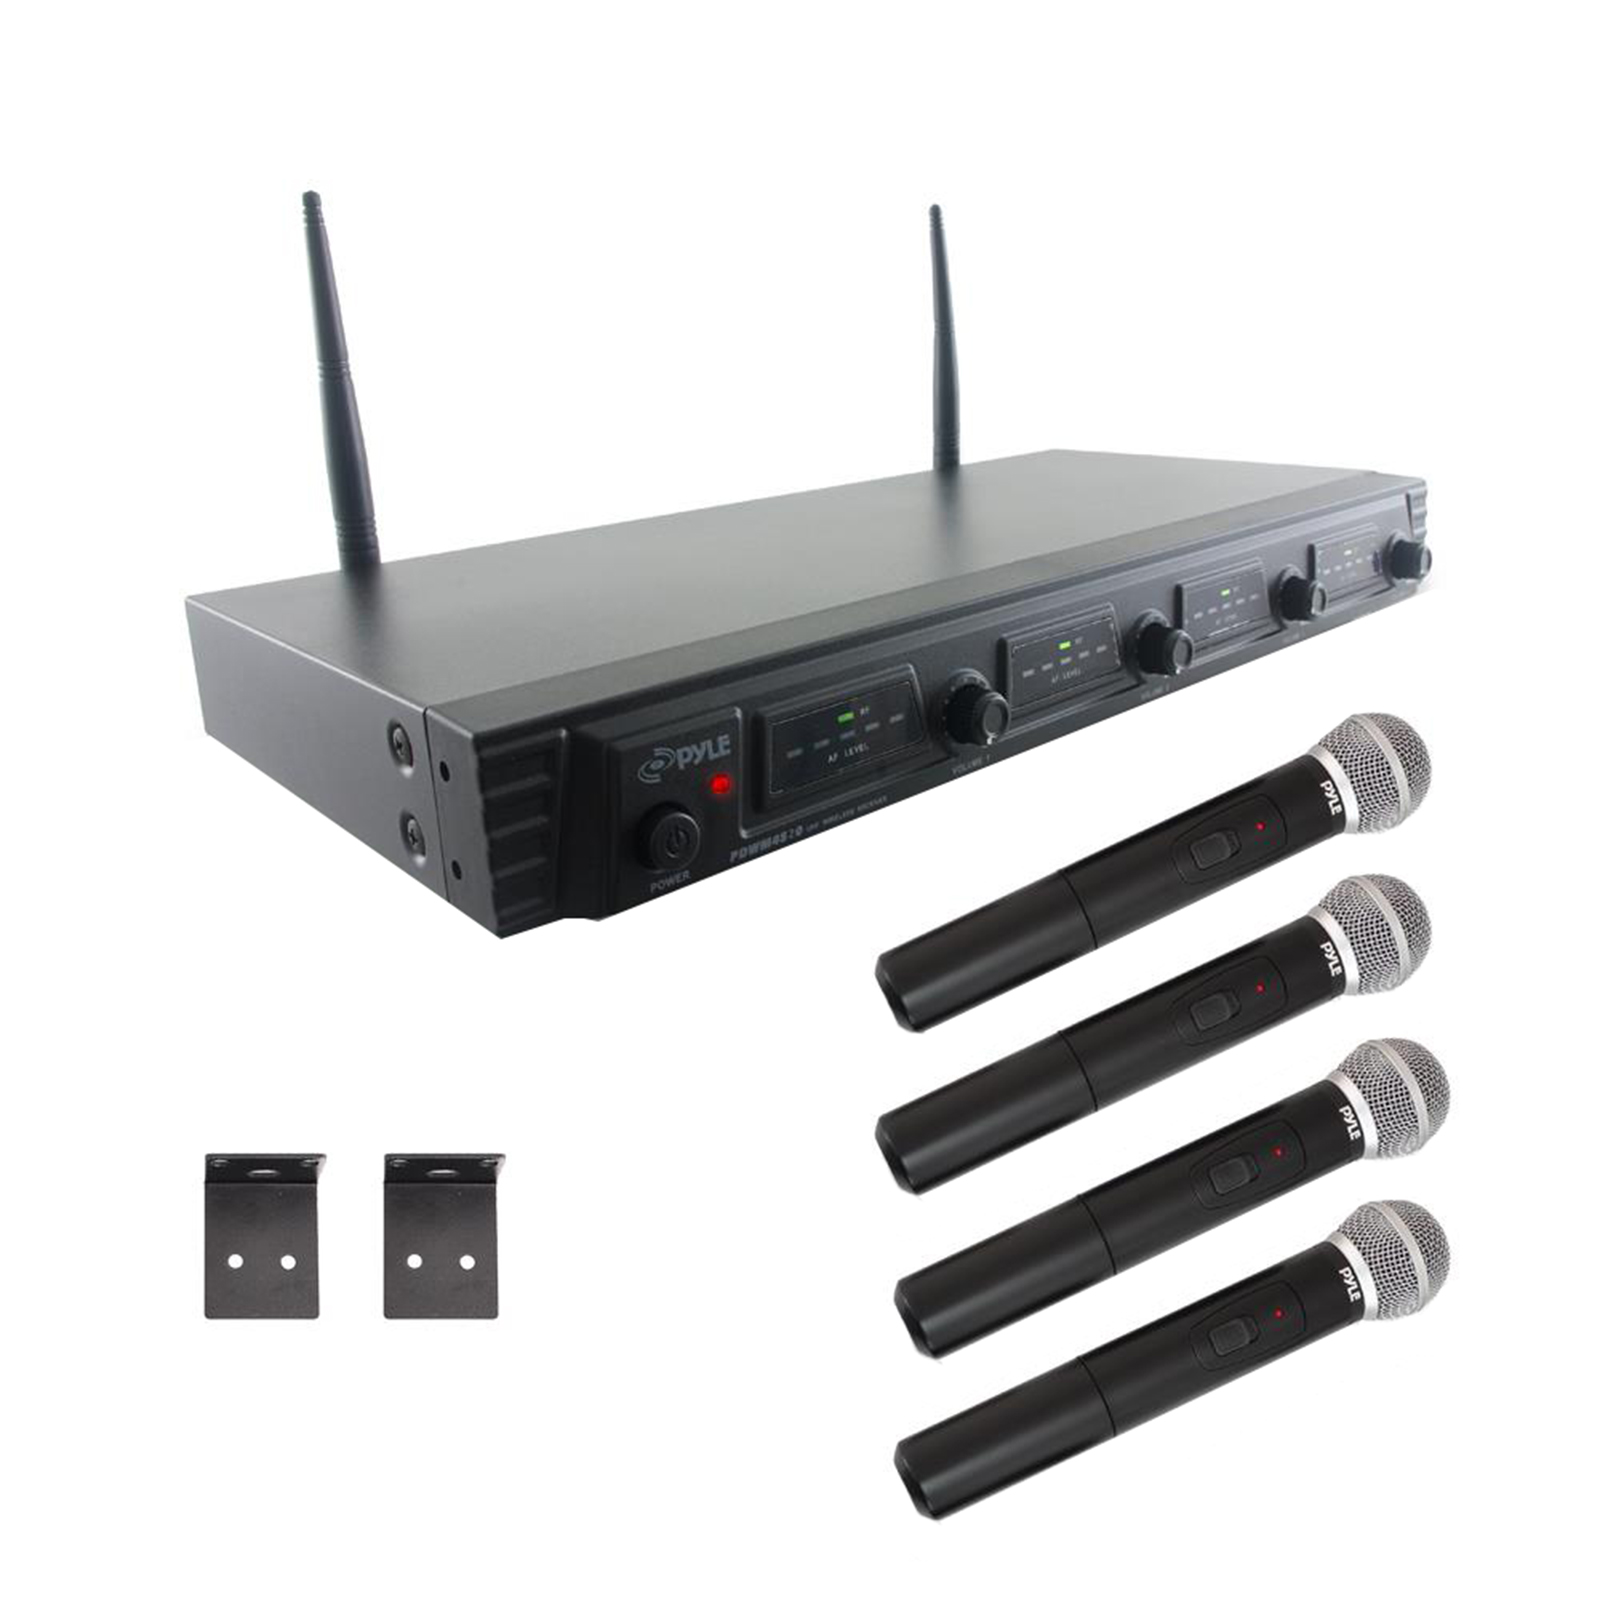 Wireless Microphone System, UHF Quad Channel Fixed Frequency, Rack Mountable, Includes (4) Handheld Microphones - image 1 of 1